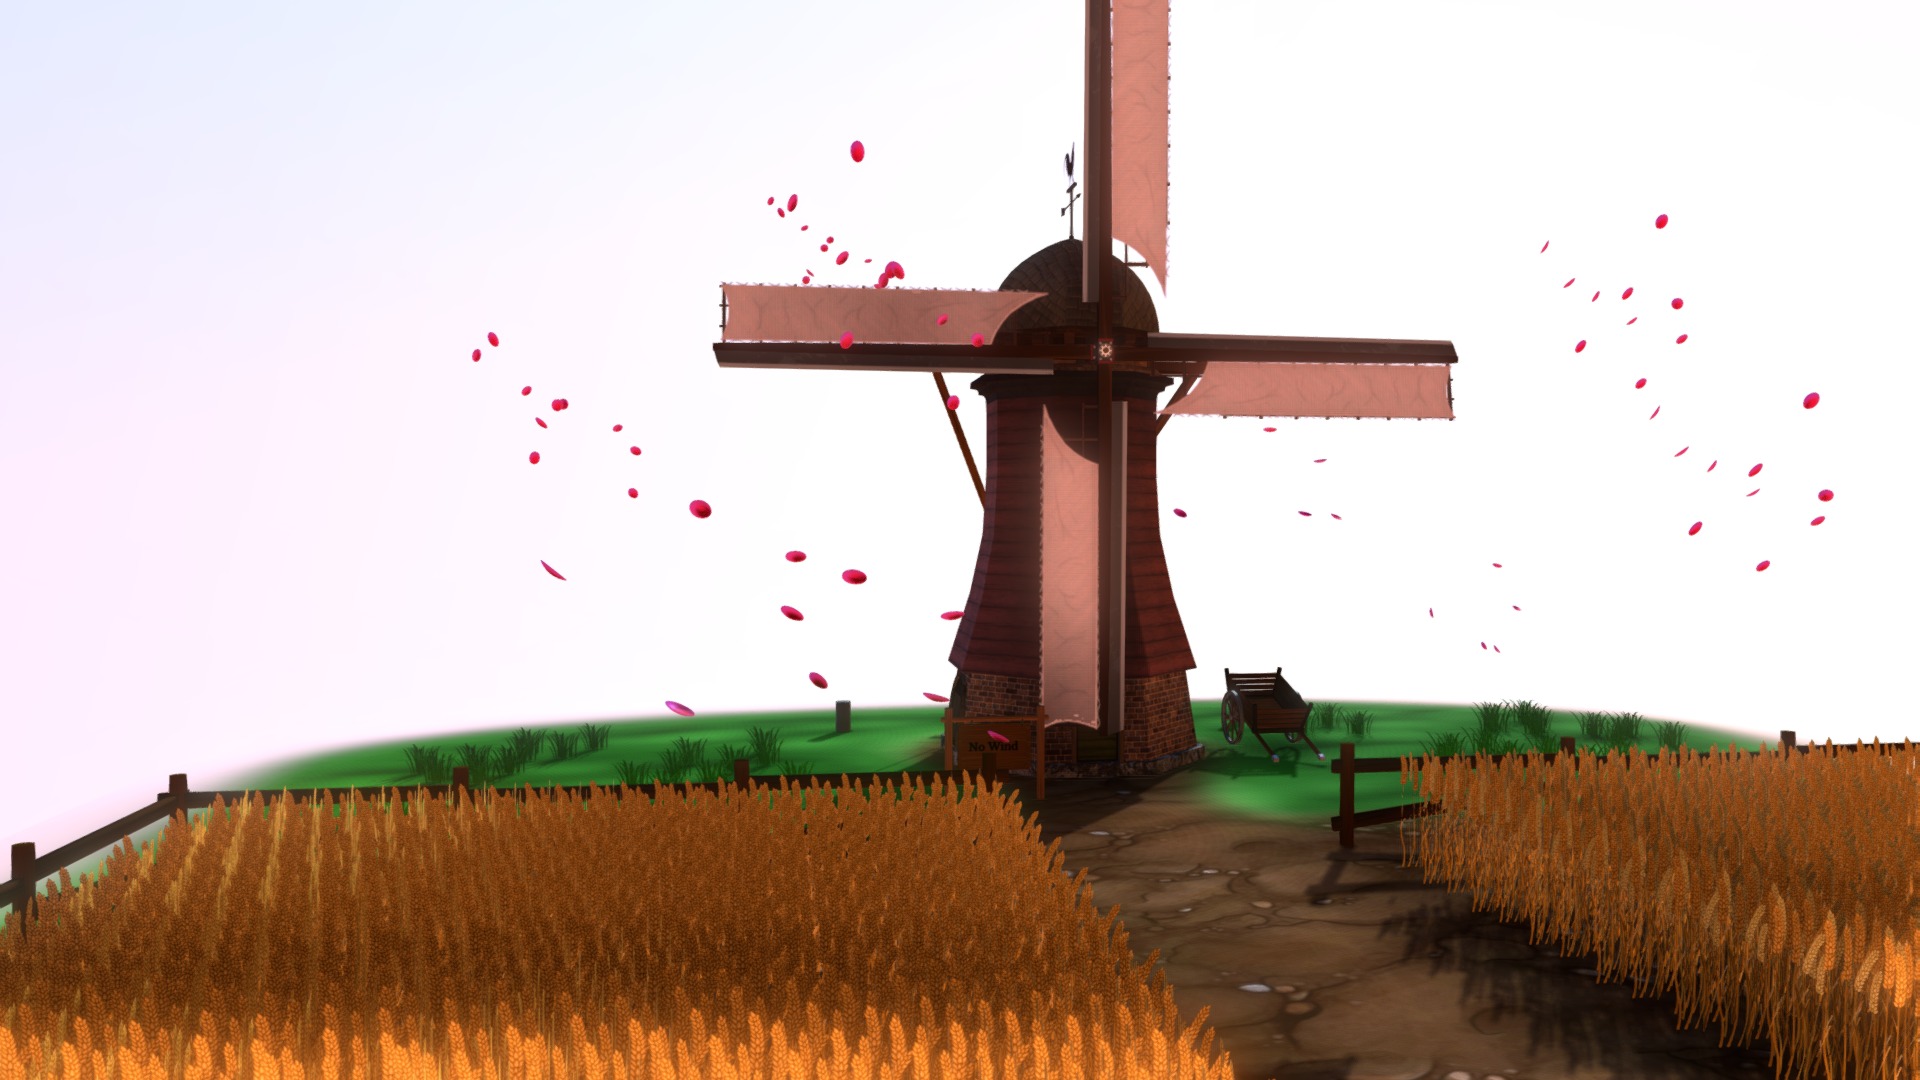 3D model of a windmill. With small animation!

Modeling: Maya

Texture: Substance Painter / Photoshop - Moulin /  Windmill - 3D model by Dylan.Fournier 3d model